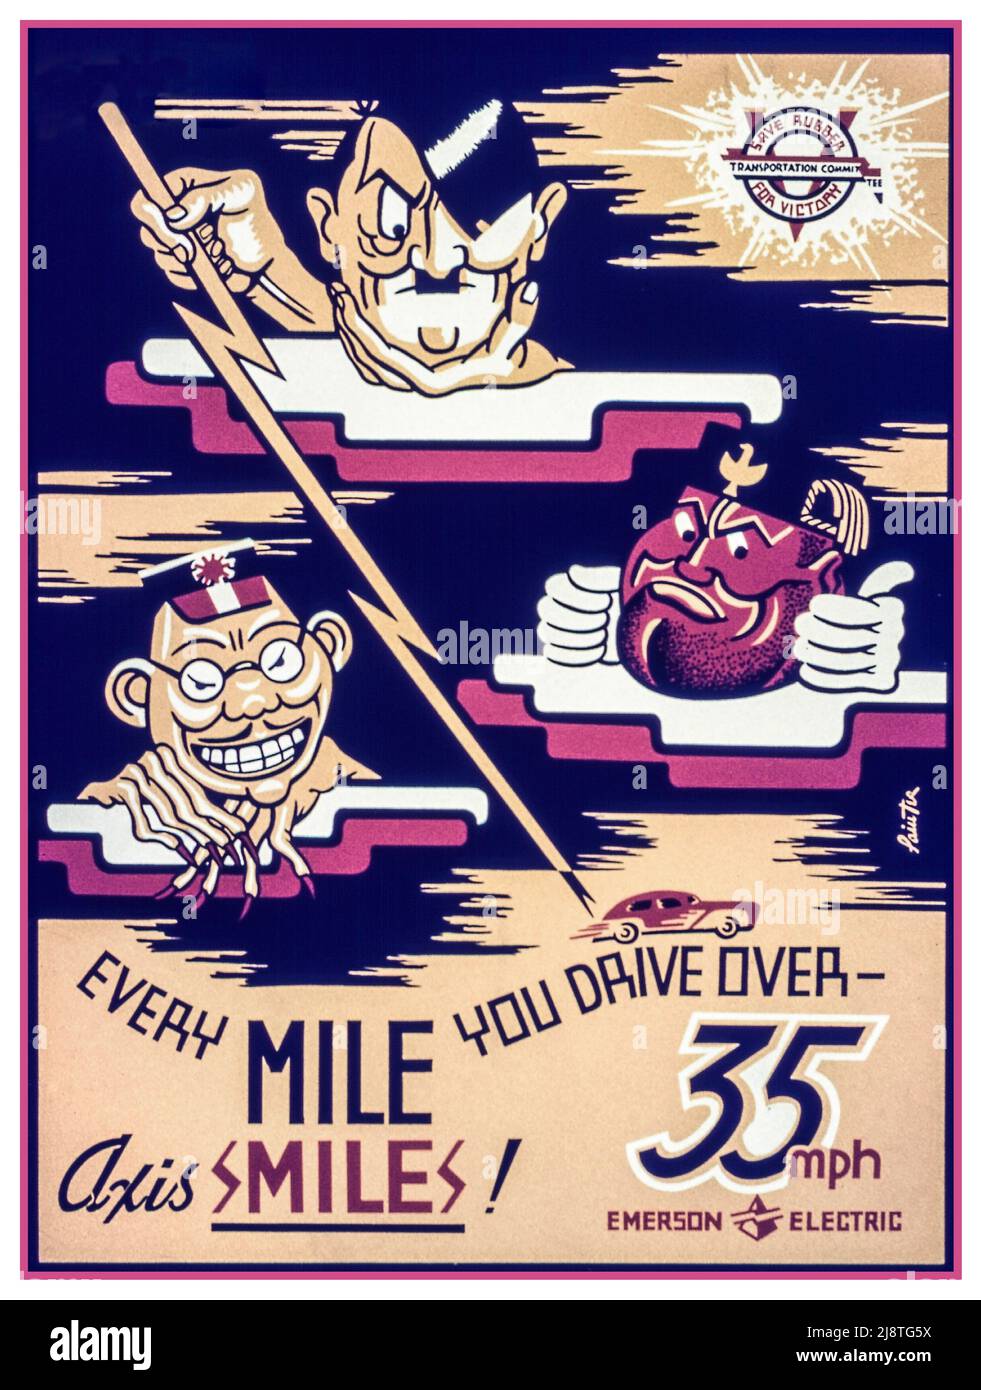 American Propaganda Information Poster WW2 Urging Fuel Economy with lower speed MPH   'Every Mile You Drive Over 35mph - Axis Smiles!  Cartoon caricatures of the Axis leaders, Adolf Hitler Nazi Germany, Hideki Tojo Imperial Japan and Benito Mussolini Facist Italy Date between circa 1942 and circa 1943 Office for Emergency Management. War Production Board. (01/1942 - 11/03/1945) World War II Second World War Stock Photo